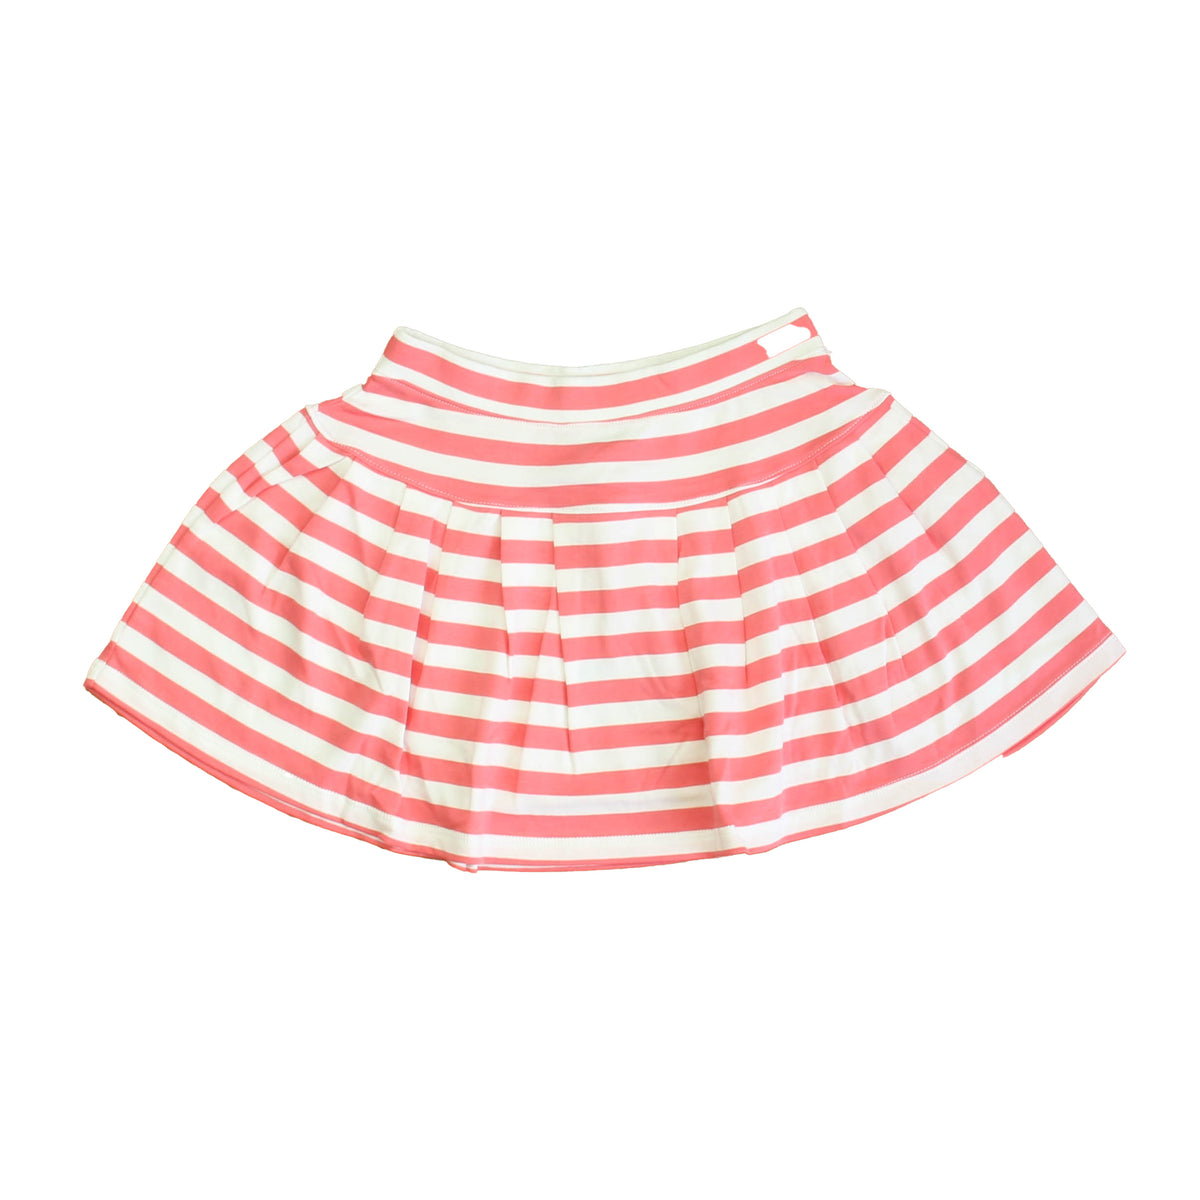 New with Tags: Sunkissed Coral | Bright White Stripe Skirt size: 6-14 Years -- FINAL SALE